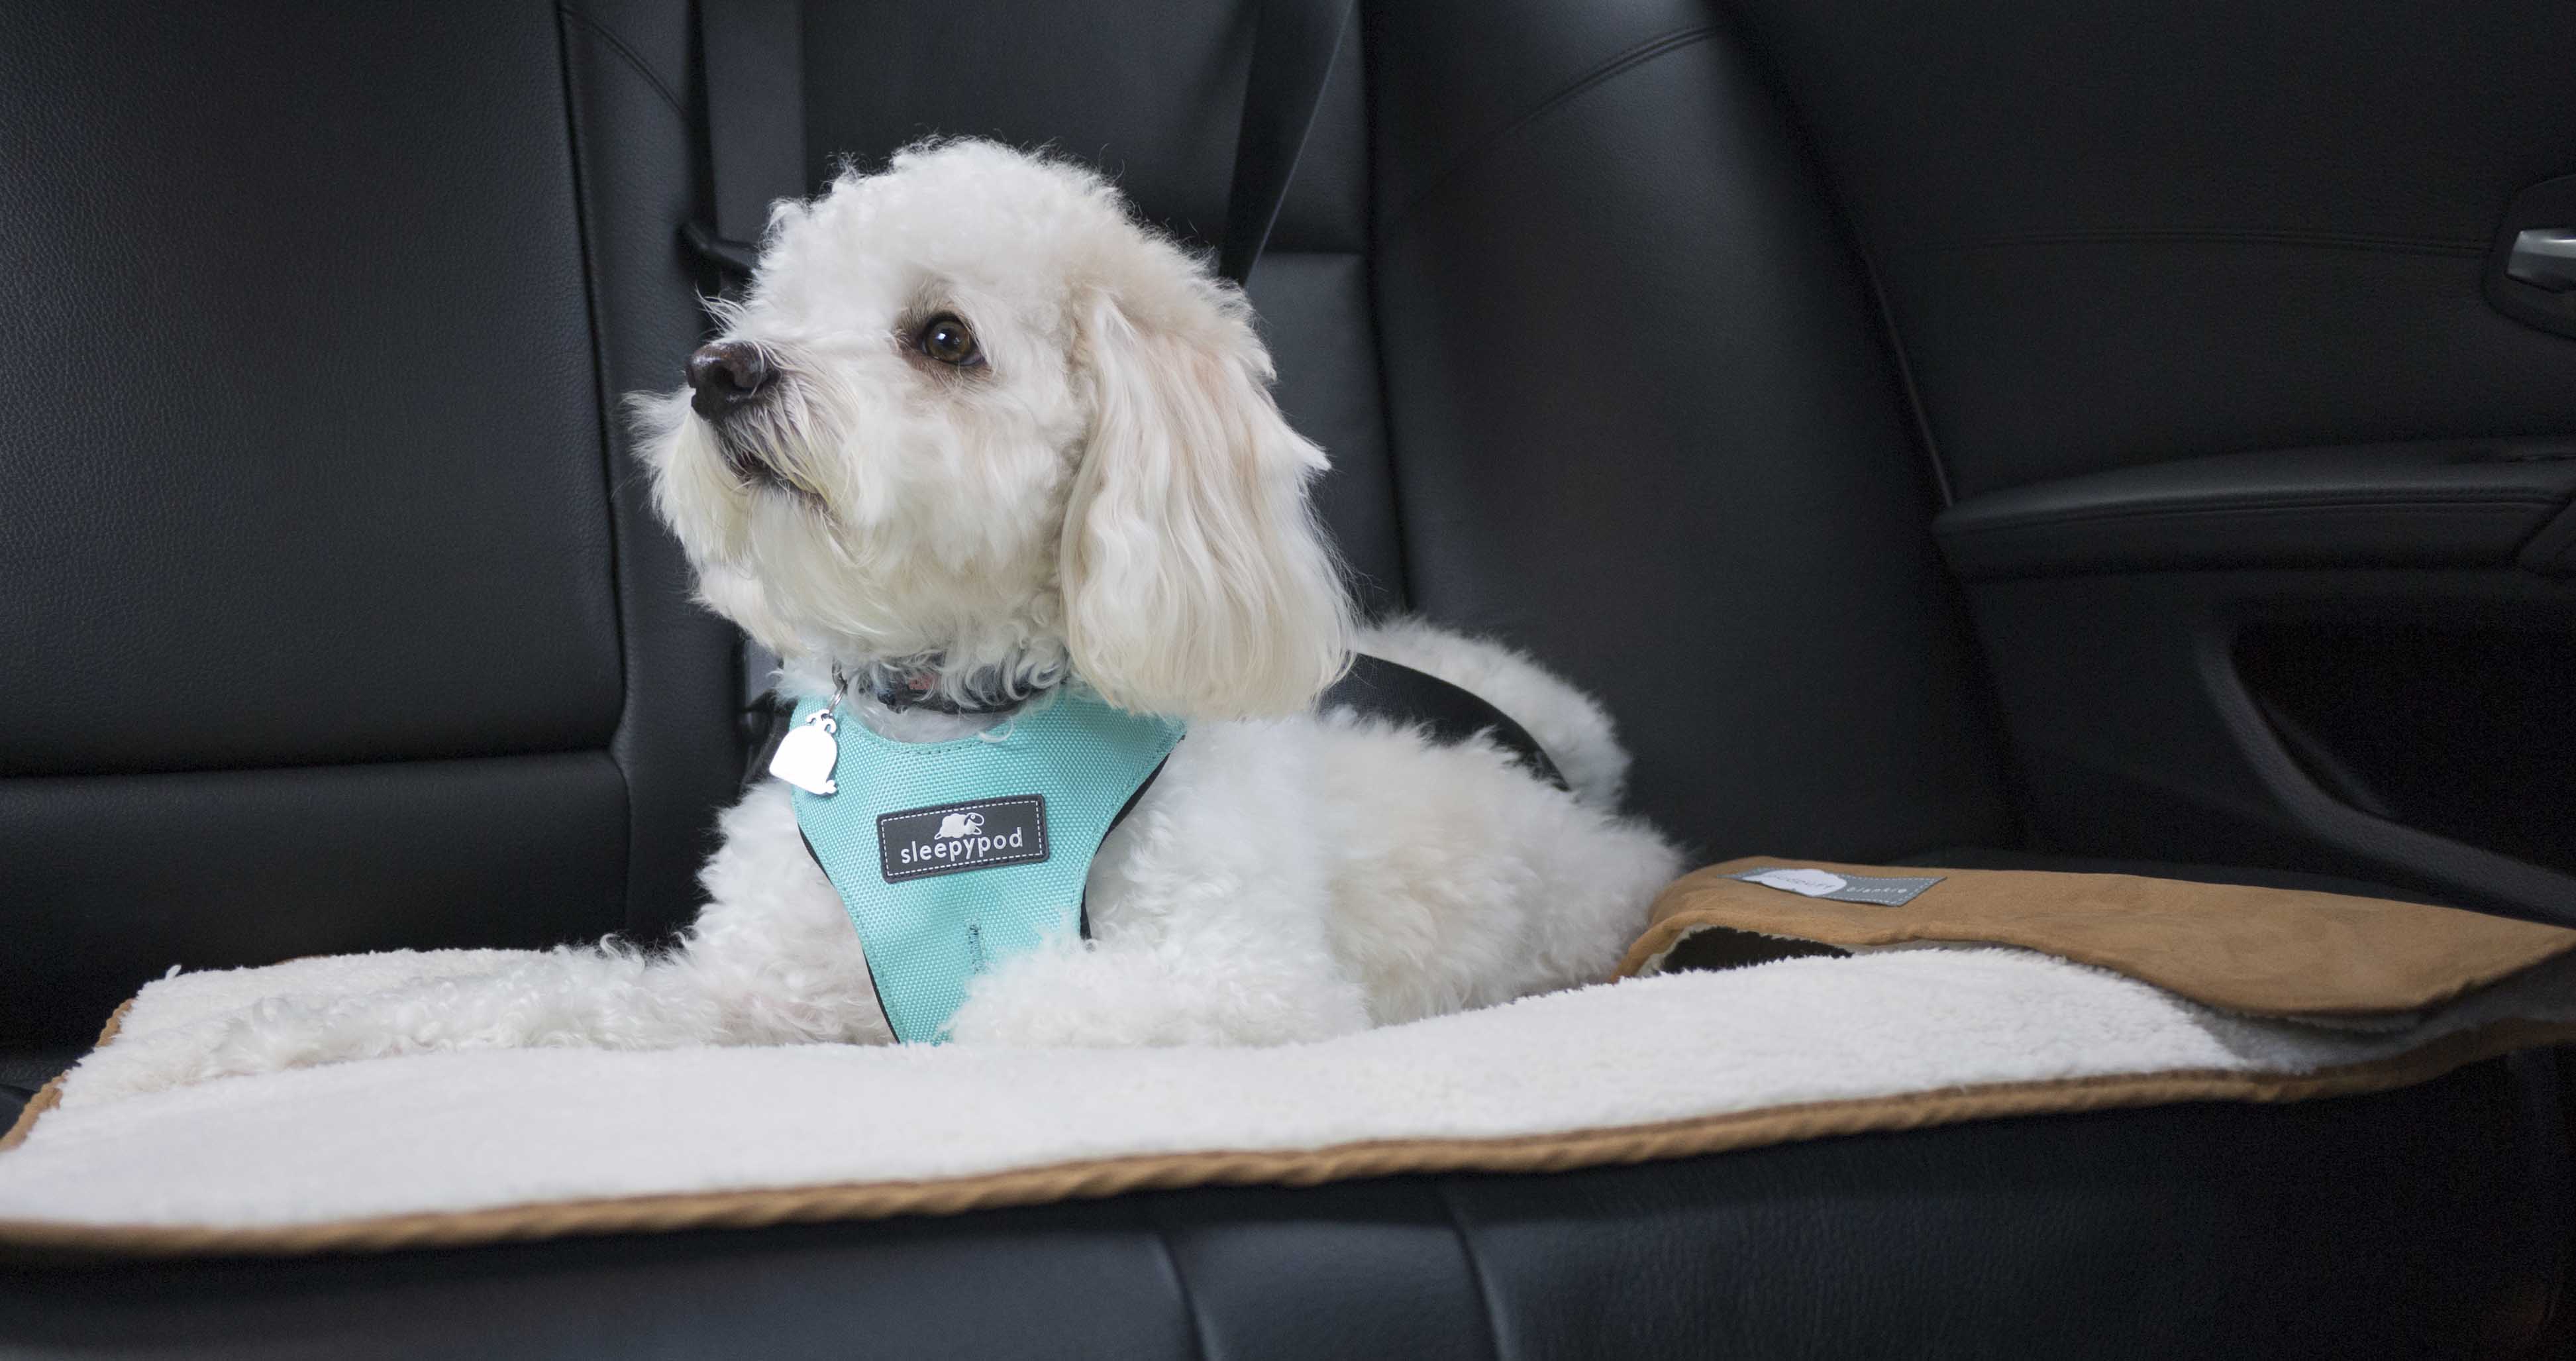 Cloudpuff can be used as a pet blanket, carrier liner, car seat cover, or couch cover.